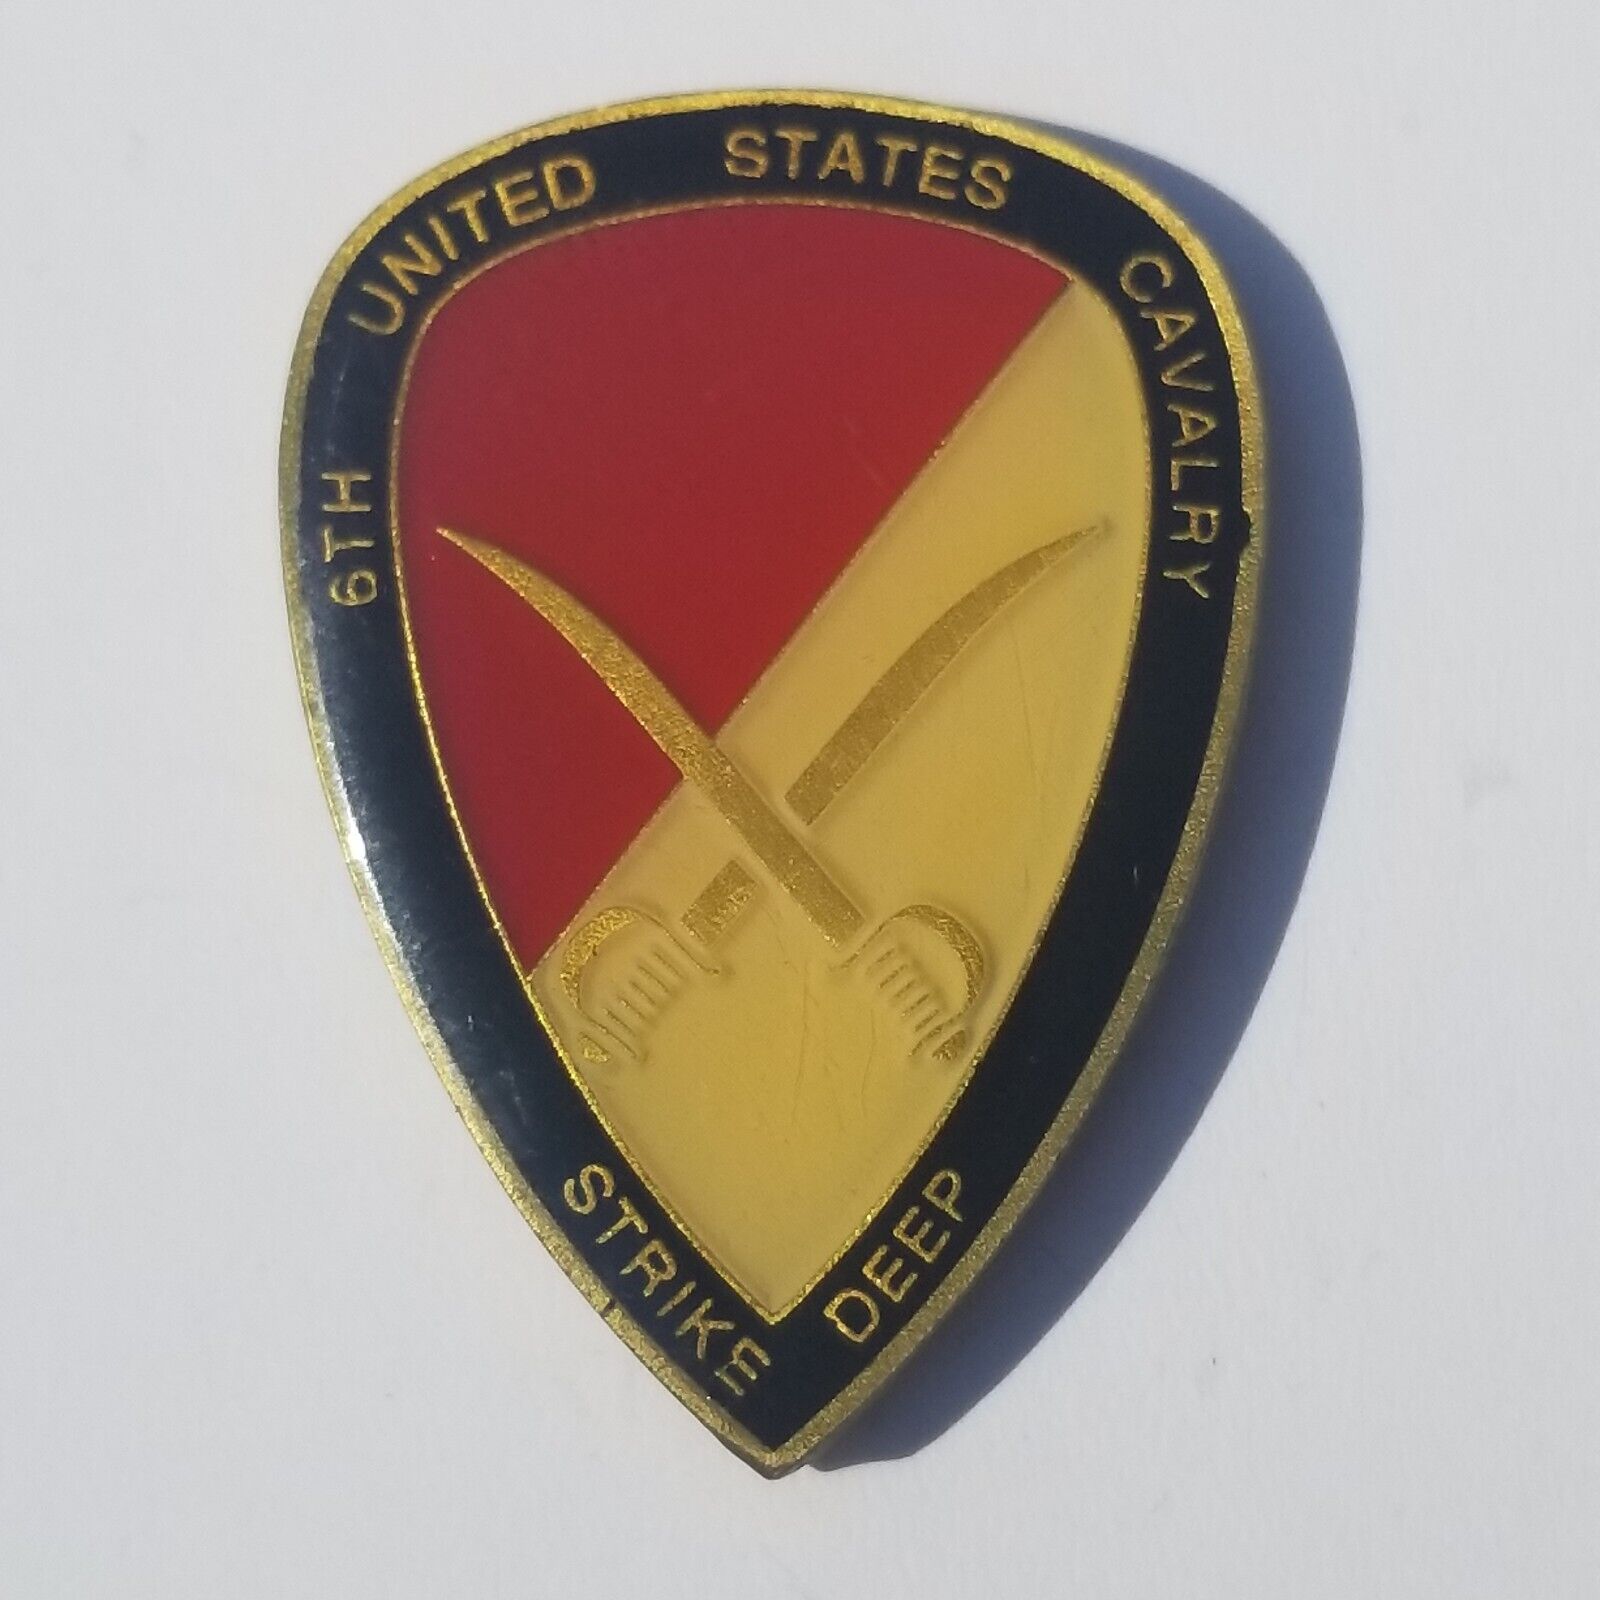 6th UNITED STATES CAVALRY (6) - COMMAND SERGEANT MAJOR CHALLENGE COIN 2\